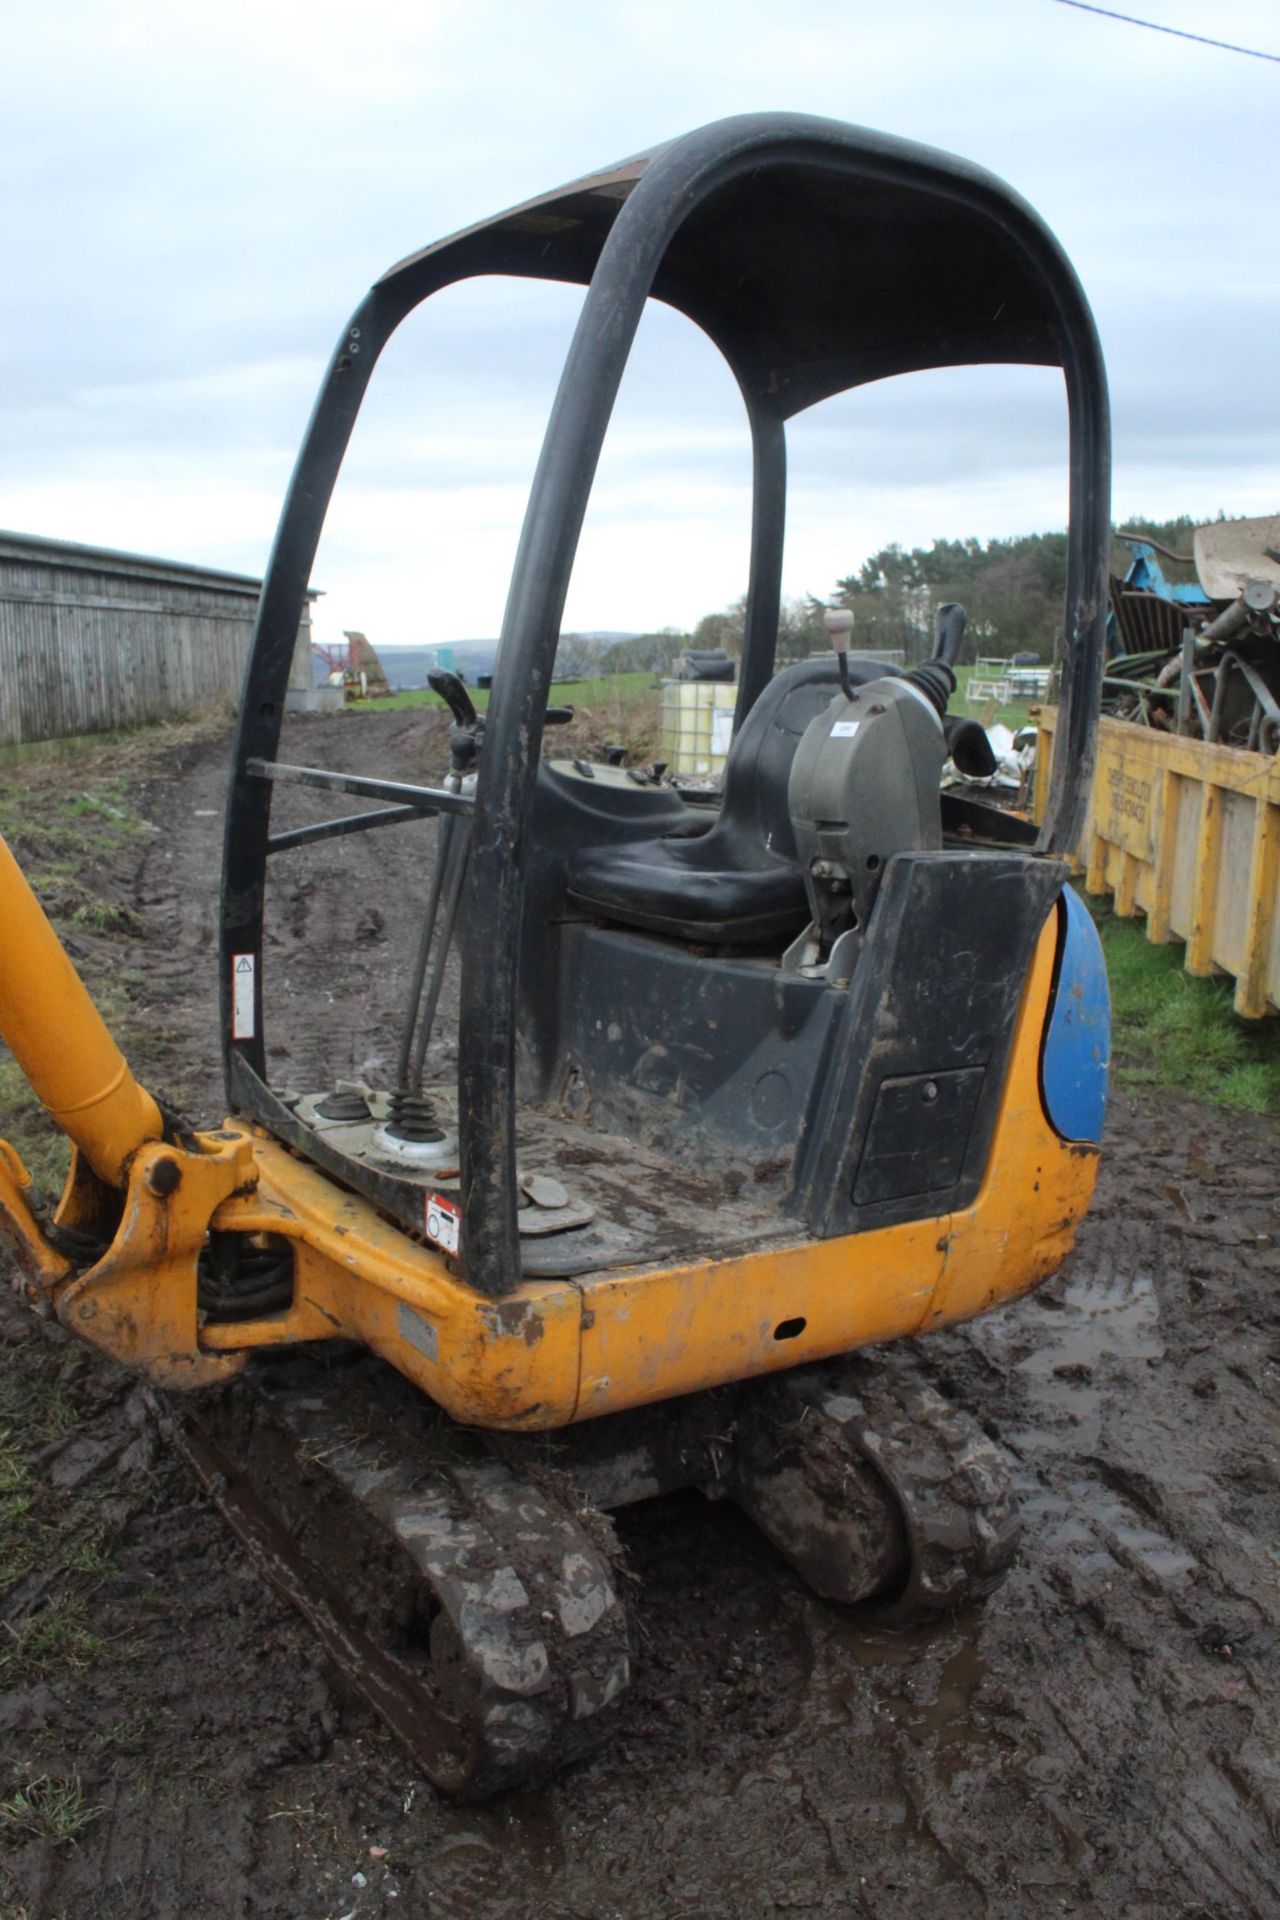 2007 JCB 1.4T EXCAVATOR WITH 3 BUCKETS SERIAL NO. JCB 09014H71283352 PRODUCT NO. 1283352 COMPLETE - Image 4 of 8